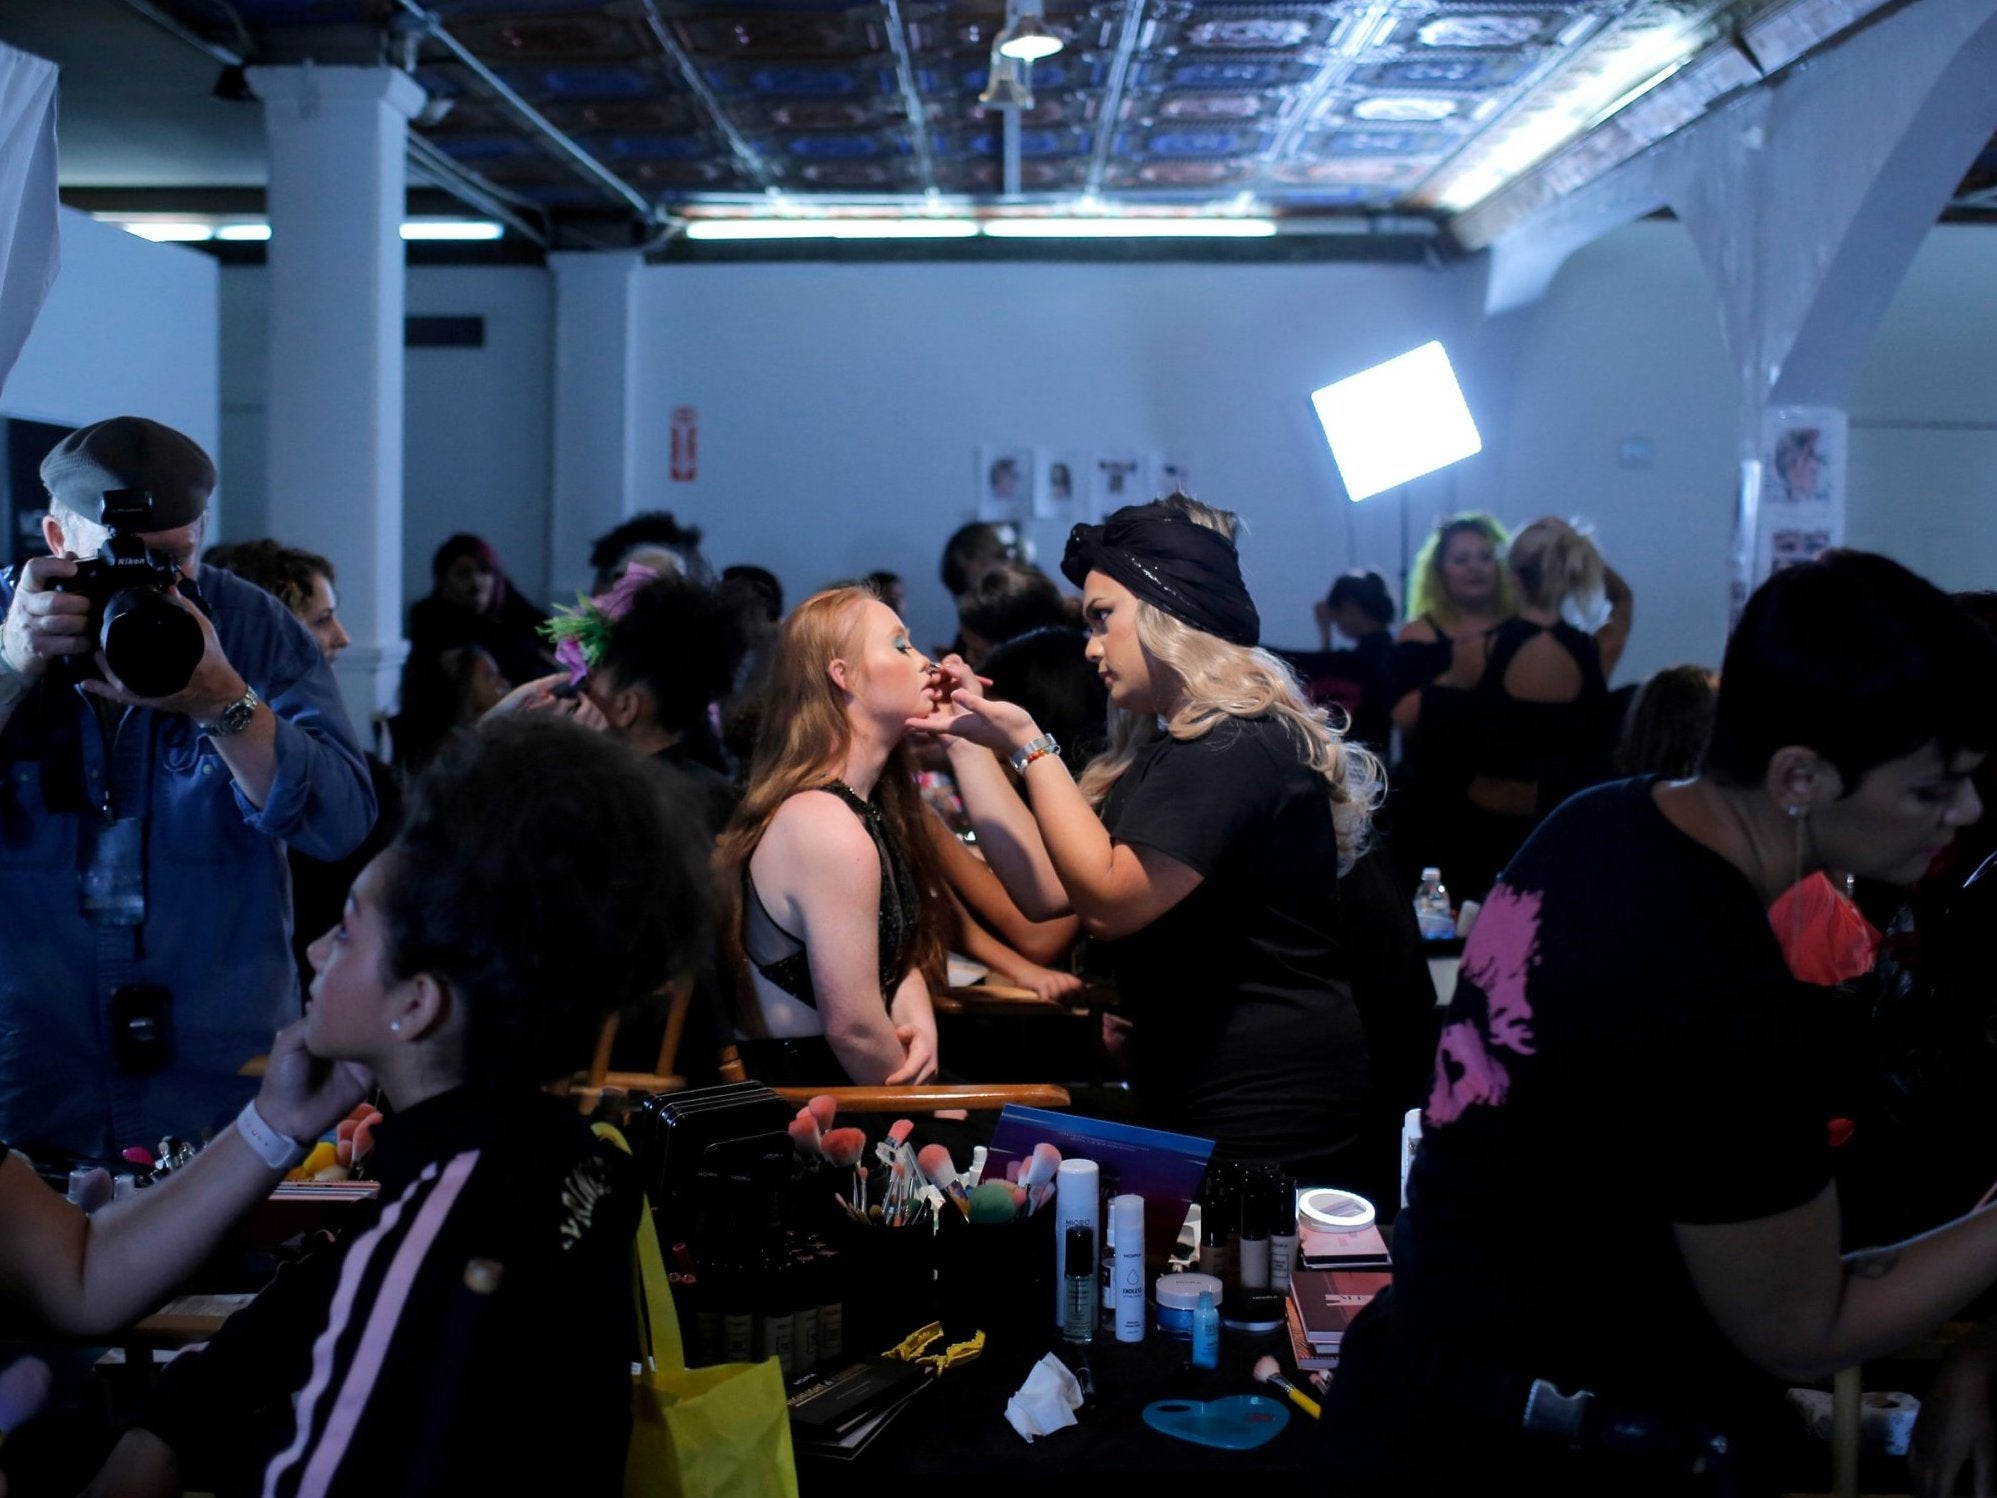 Model Madeline has the finishing touches to her makeup done backstage during New York Fashion Week